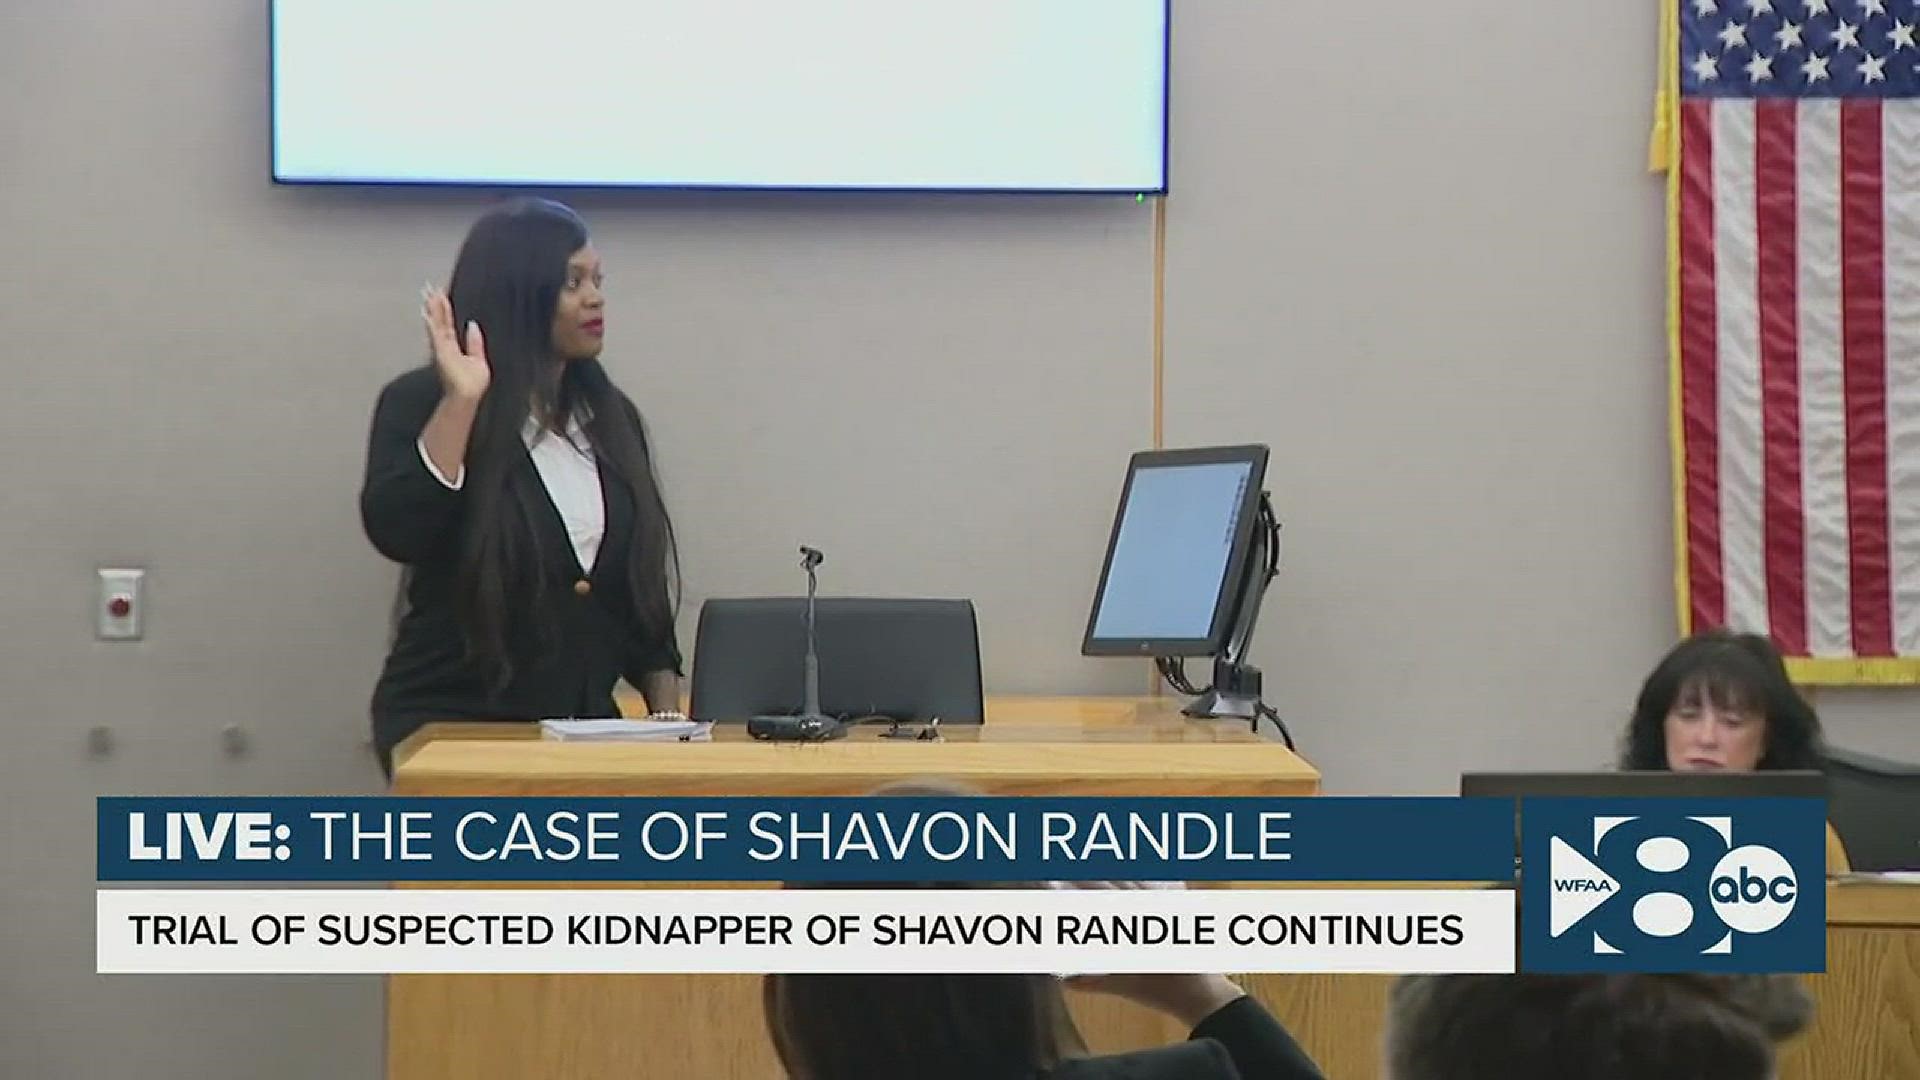 Ledoris Randle's boyfriend was allegedly involved in a theft of marijuana that authorities say led to the kidnapping of her cousin, 13-year-old Shavon Randle.